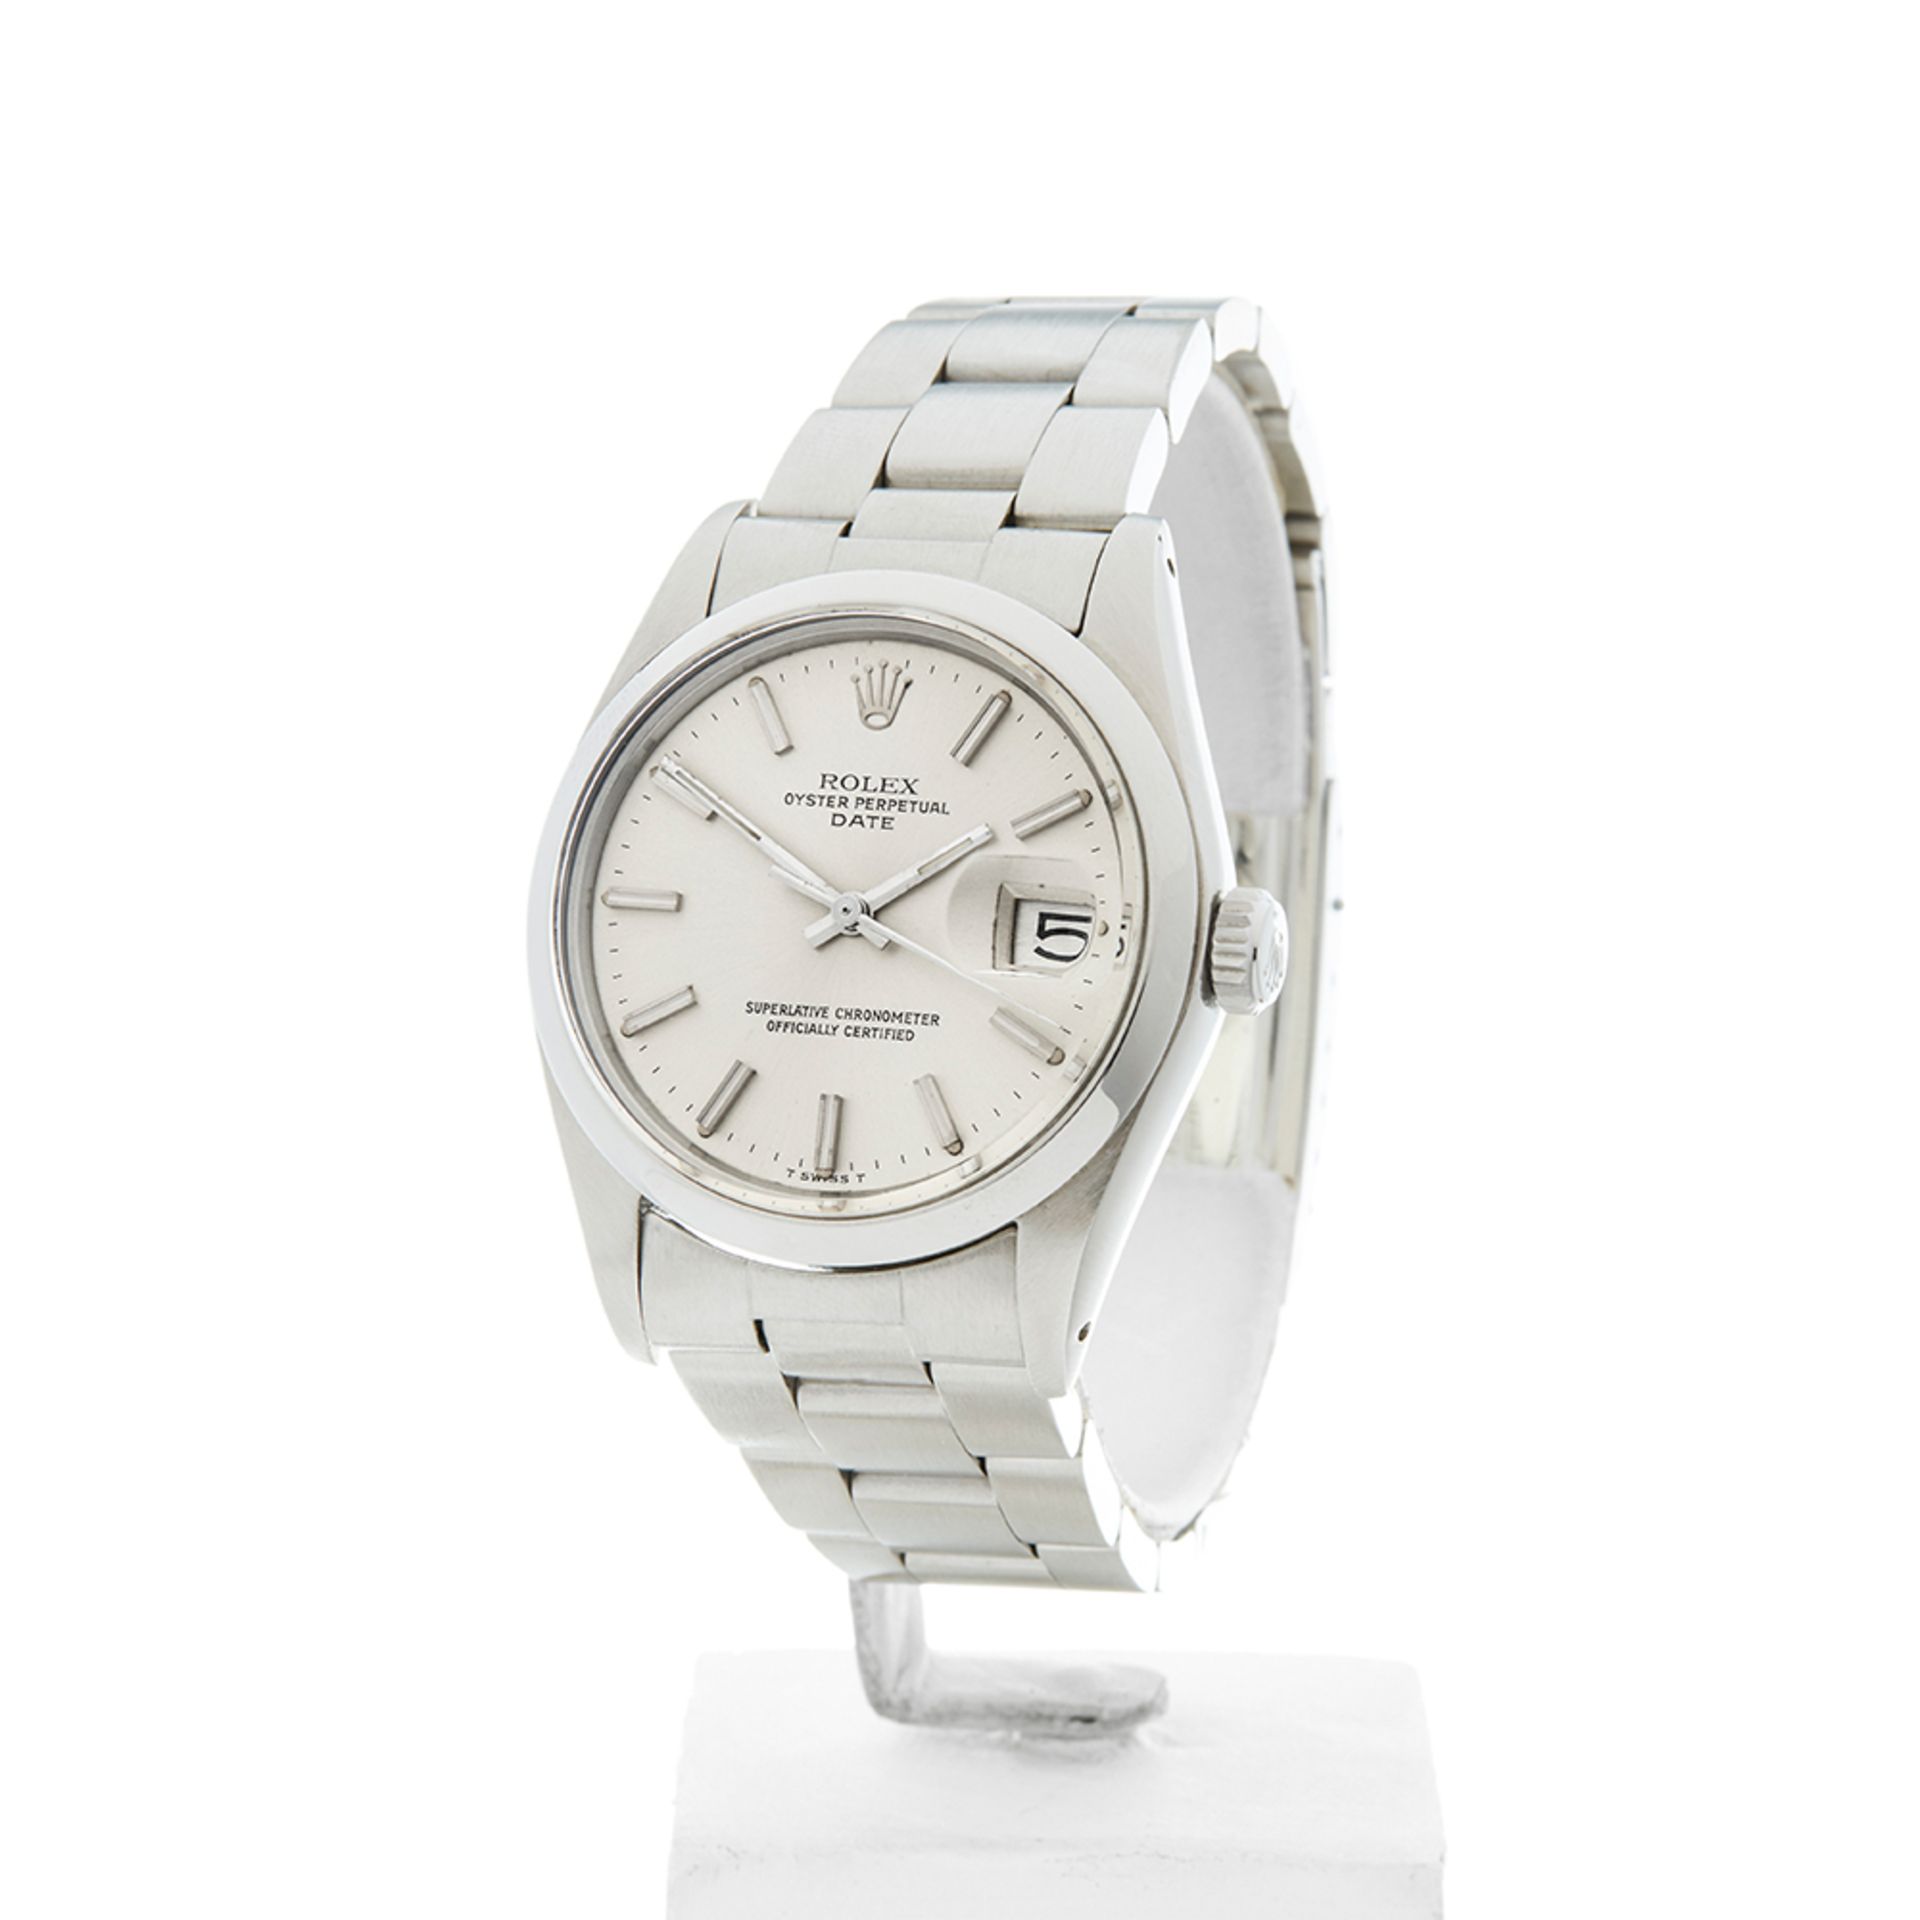 Rolex Date 36mm Stainless Steel 1500 - Image 3 of 9